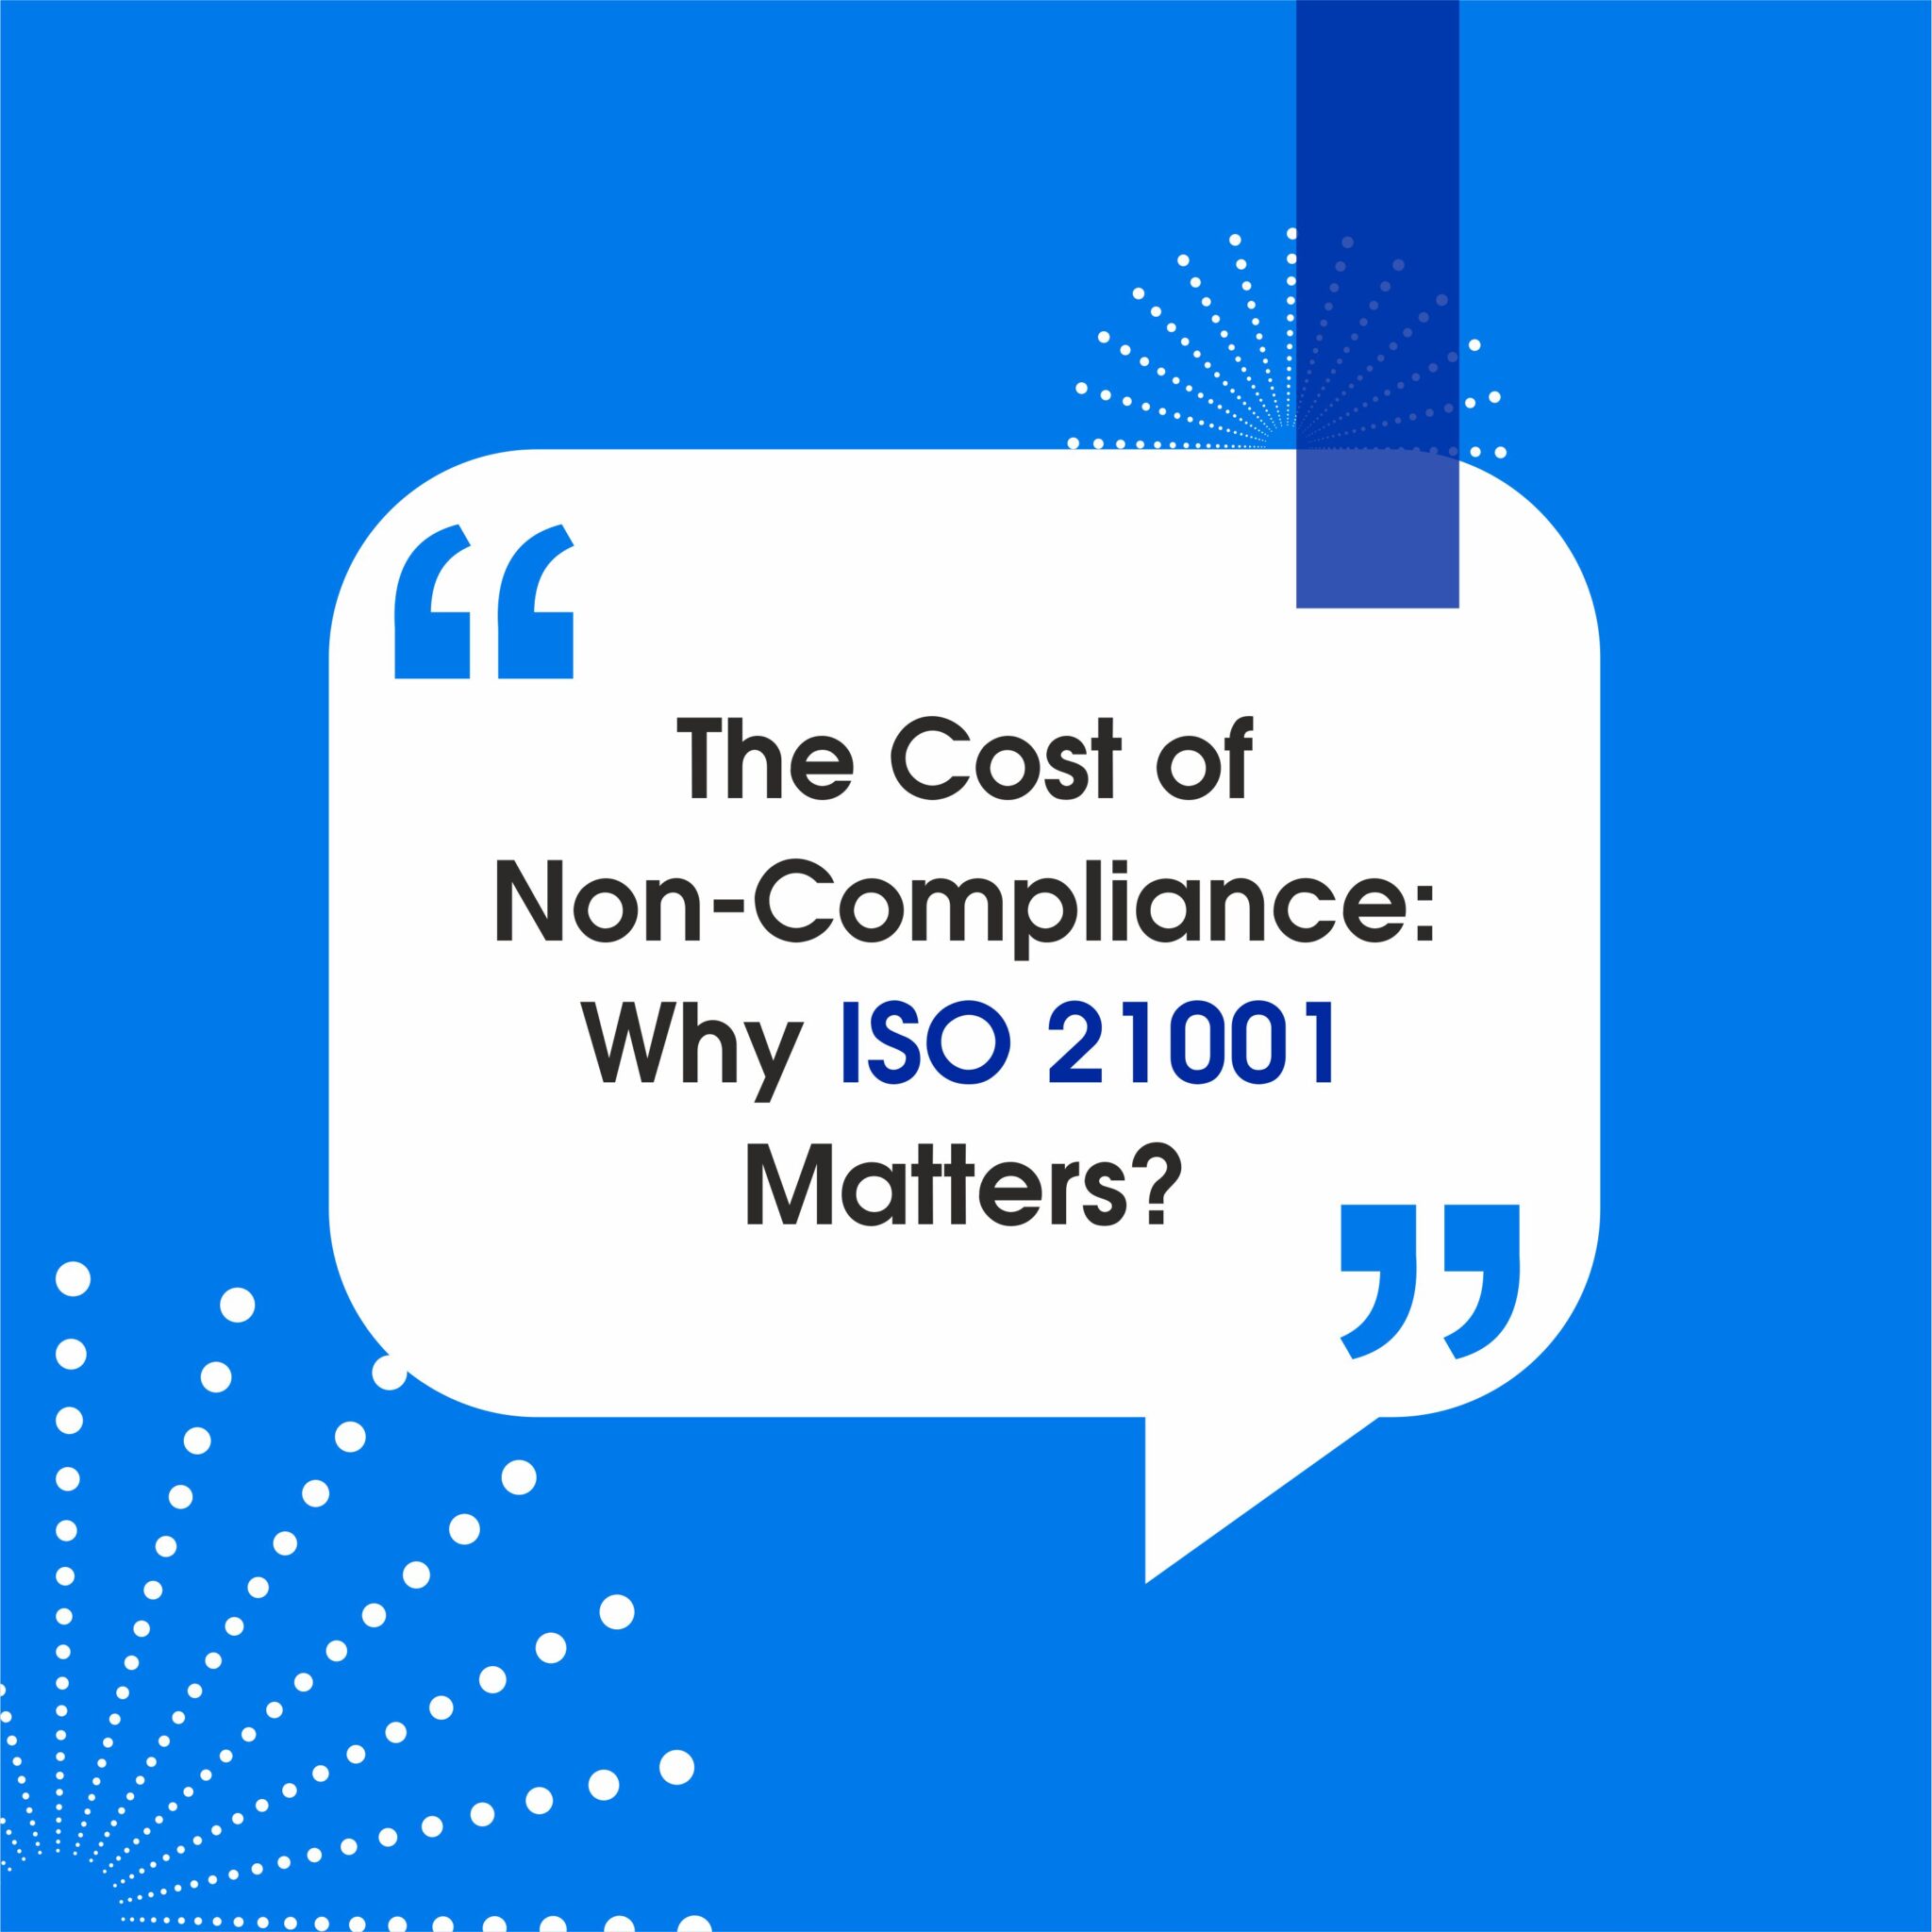 The Cost of Non-Compliance: Why ISO 21001 Matters?